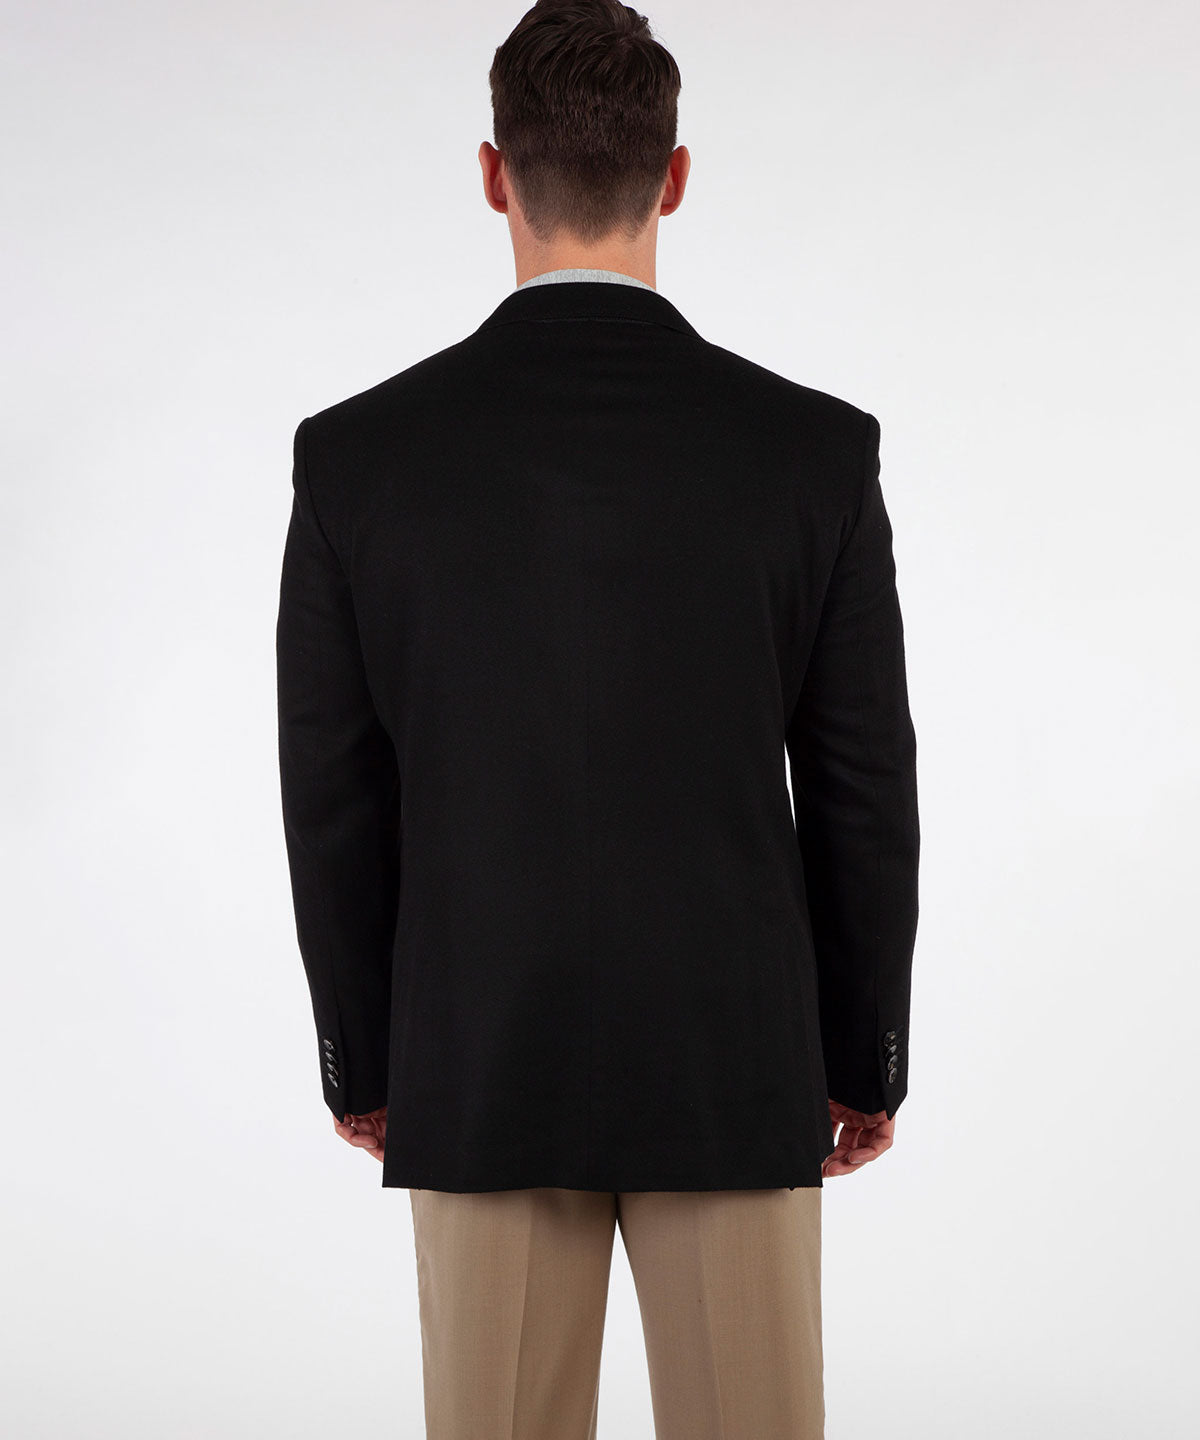 Articles of Style | Signature Cashmere Jacket